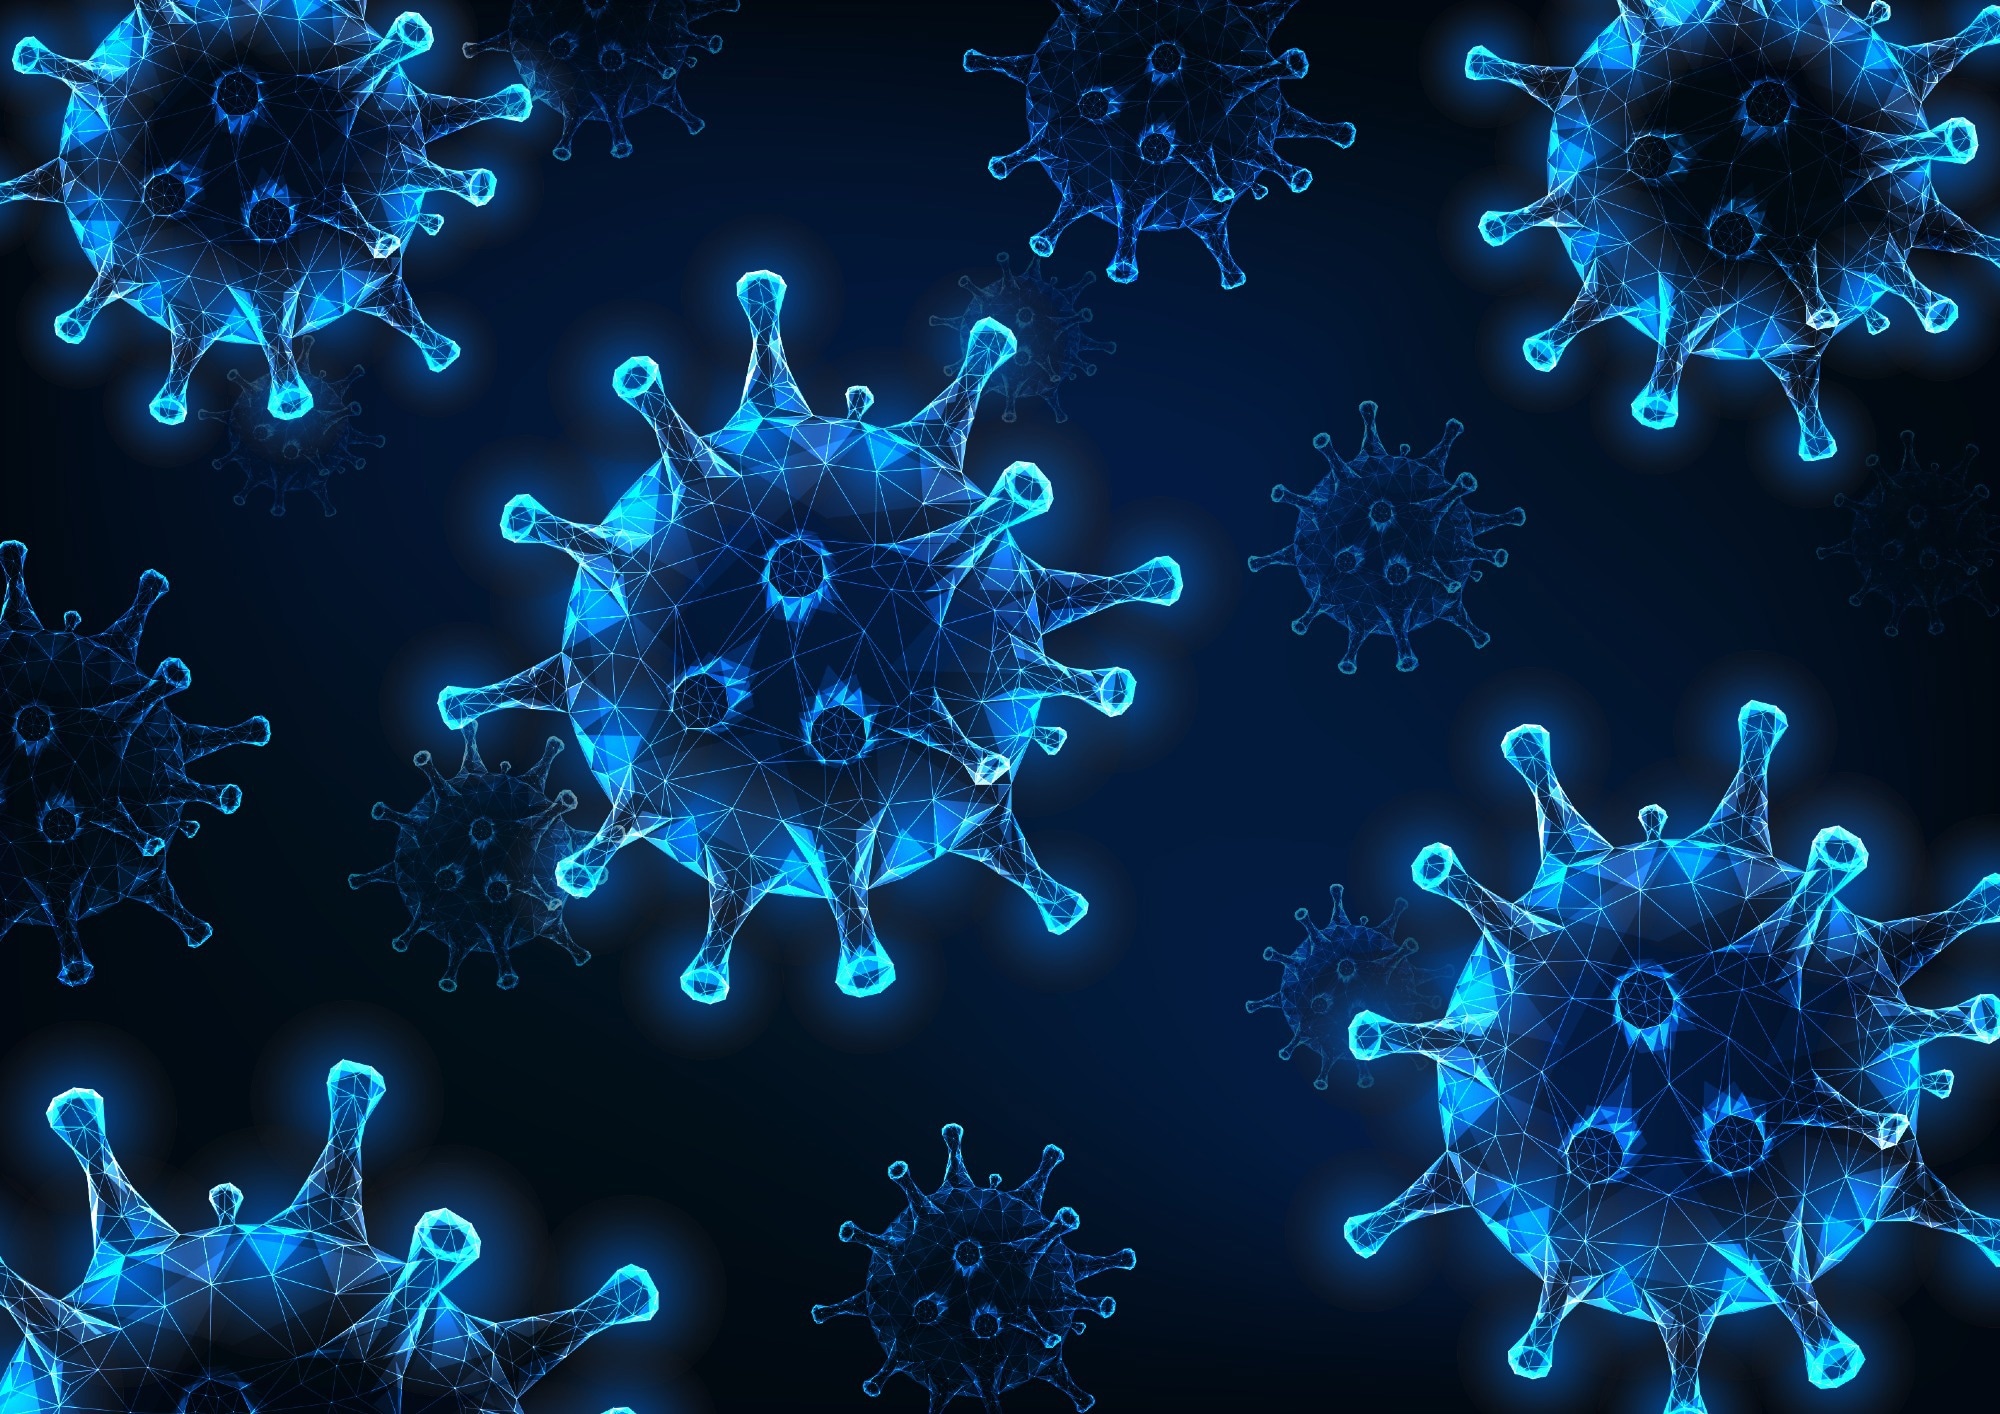 Can CeO2 Nanoparticles Offer Effective Antiviral Protection?